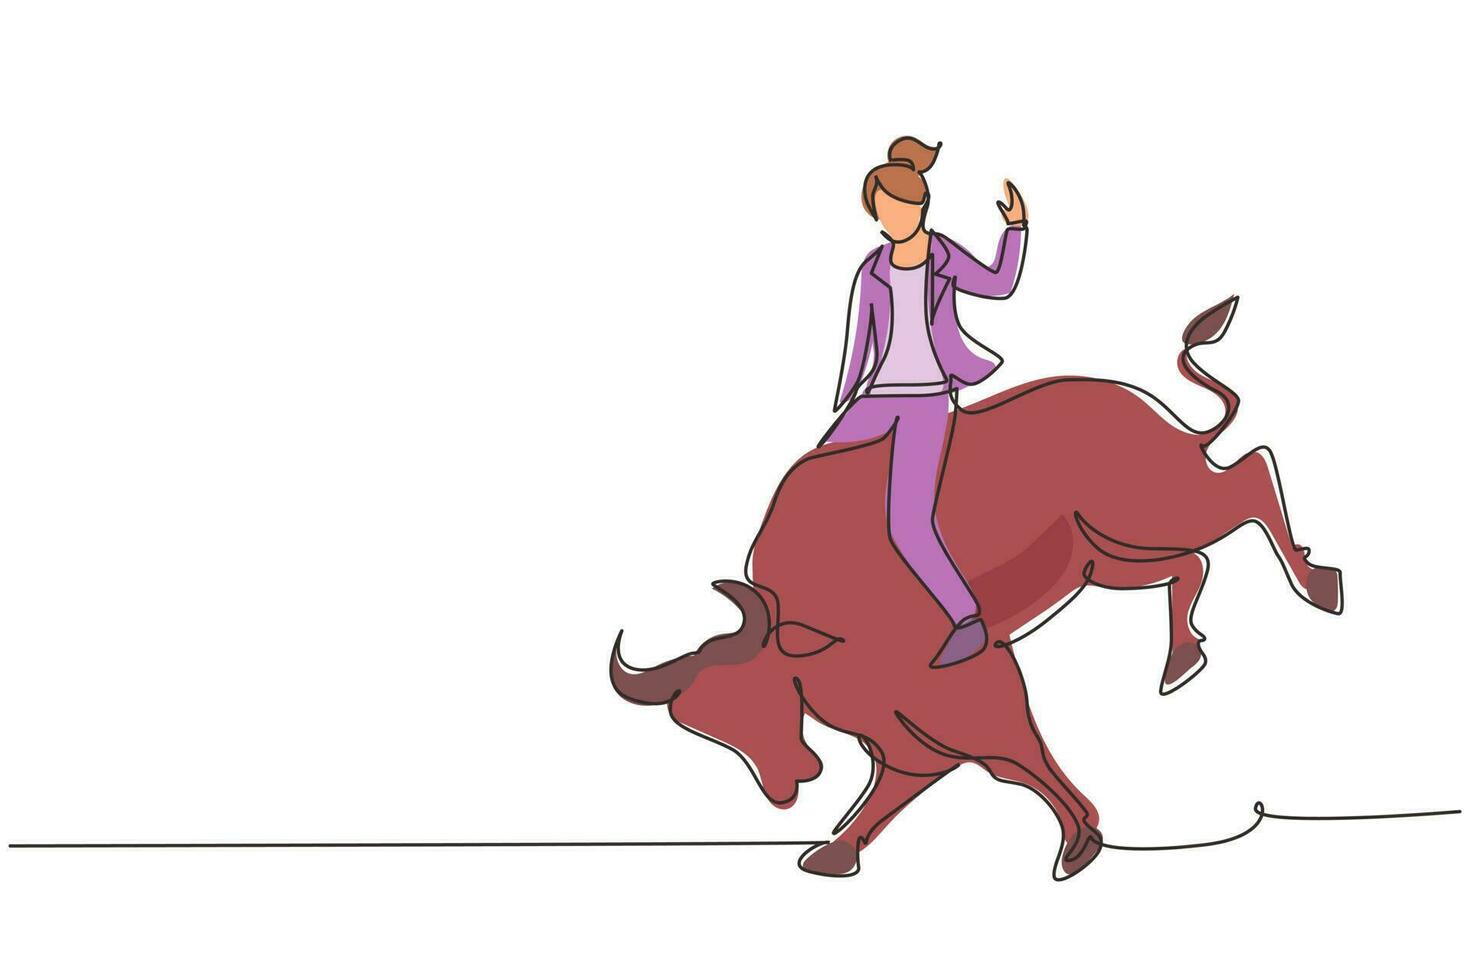 Single one line drawing businesswoman riding rodeo bull. Investment, bullish stock market trading, rising bonds trend. Successful business woman. Continuous line design graphic vector illustration